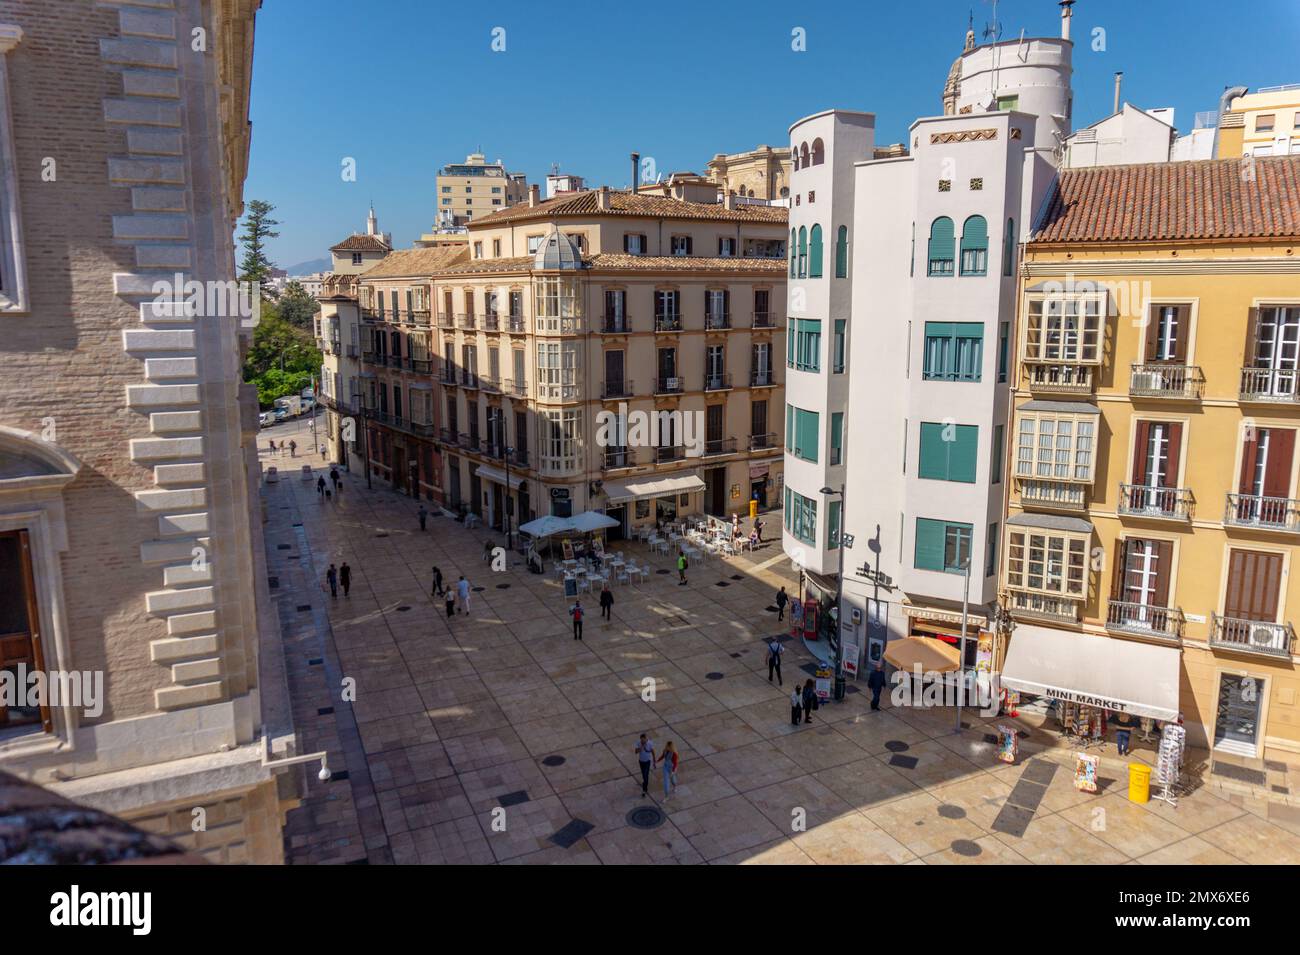 Malaga,Spain 04.04.2019: Decorated exteriours residental buildings in Malaga city, Andalusia, Spain with palm trees , Stock Photo